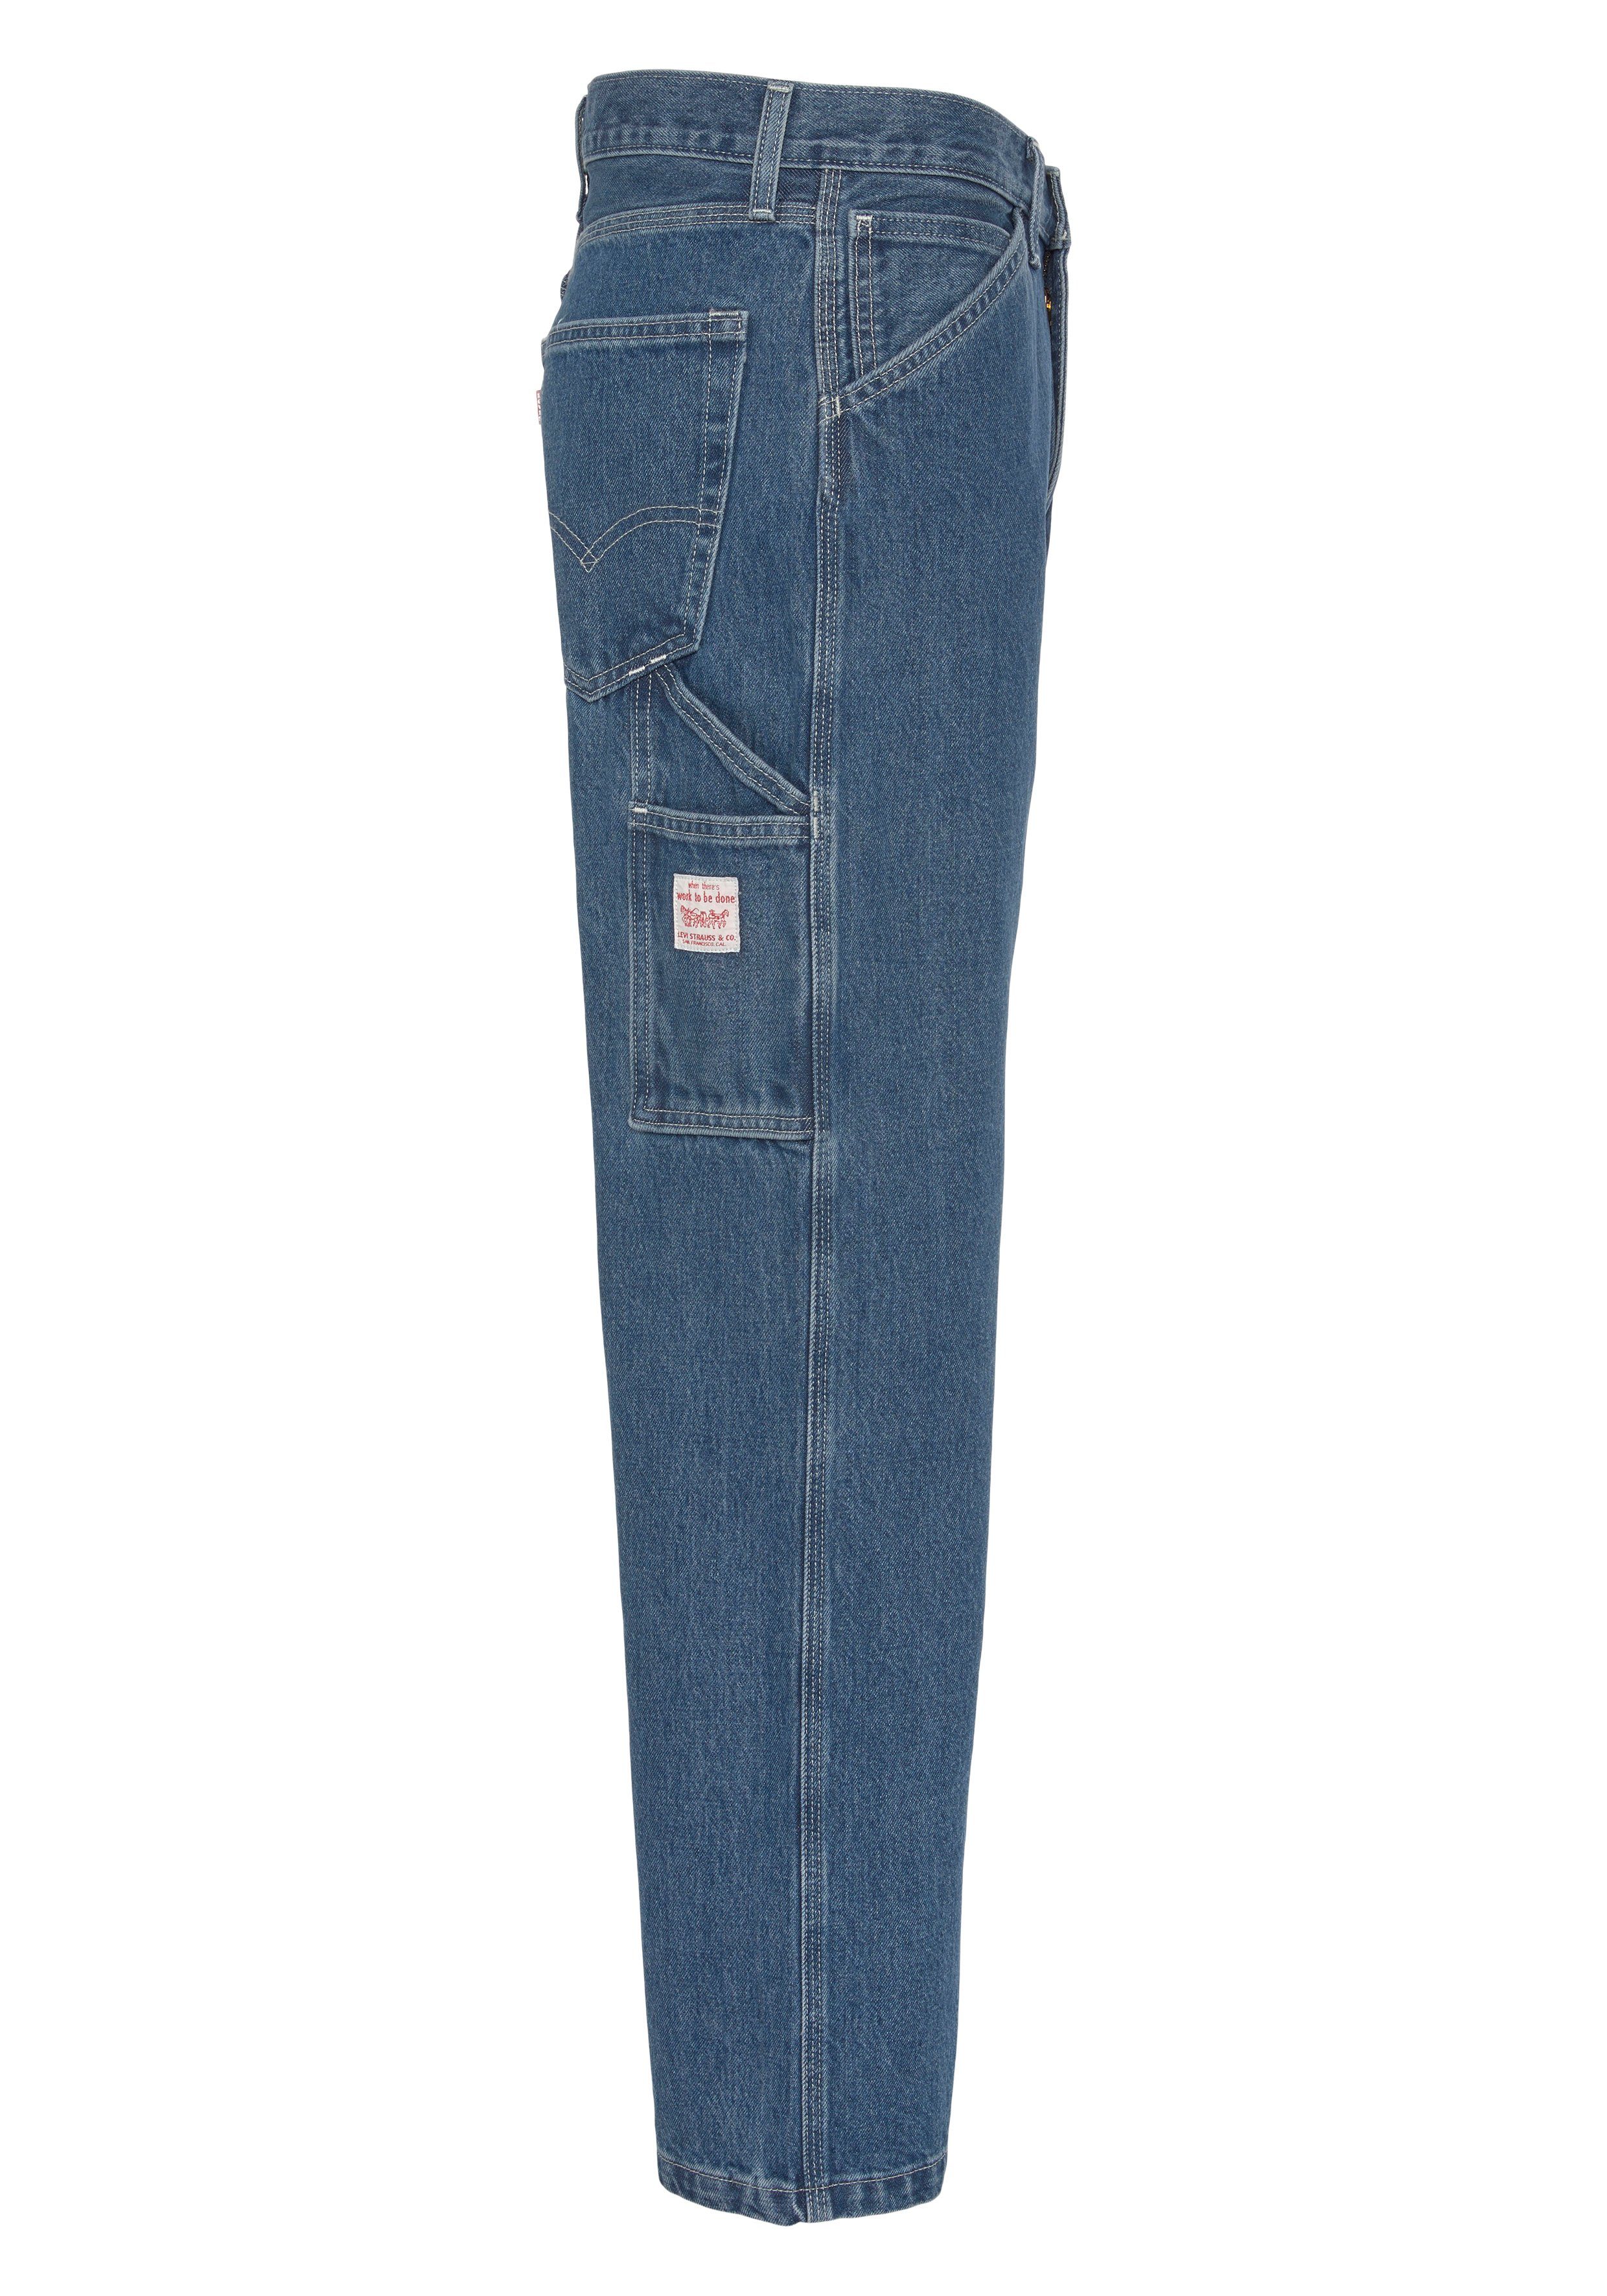 in LOOSE charm STAY Levi's® 568 Cargojeans CARPENTER safe